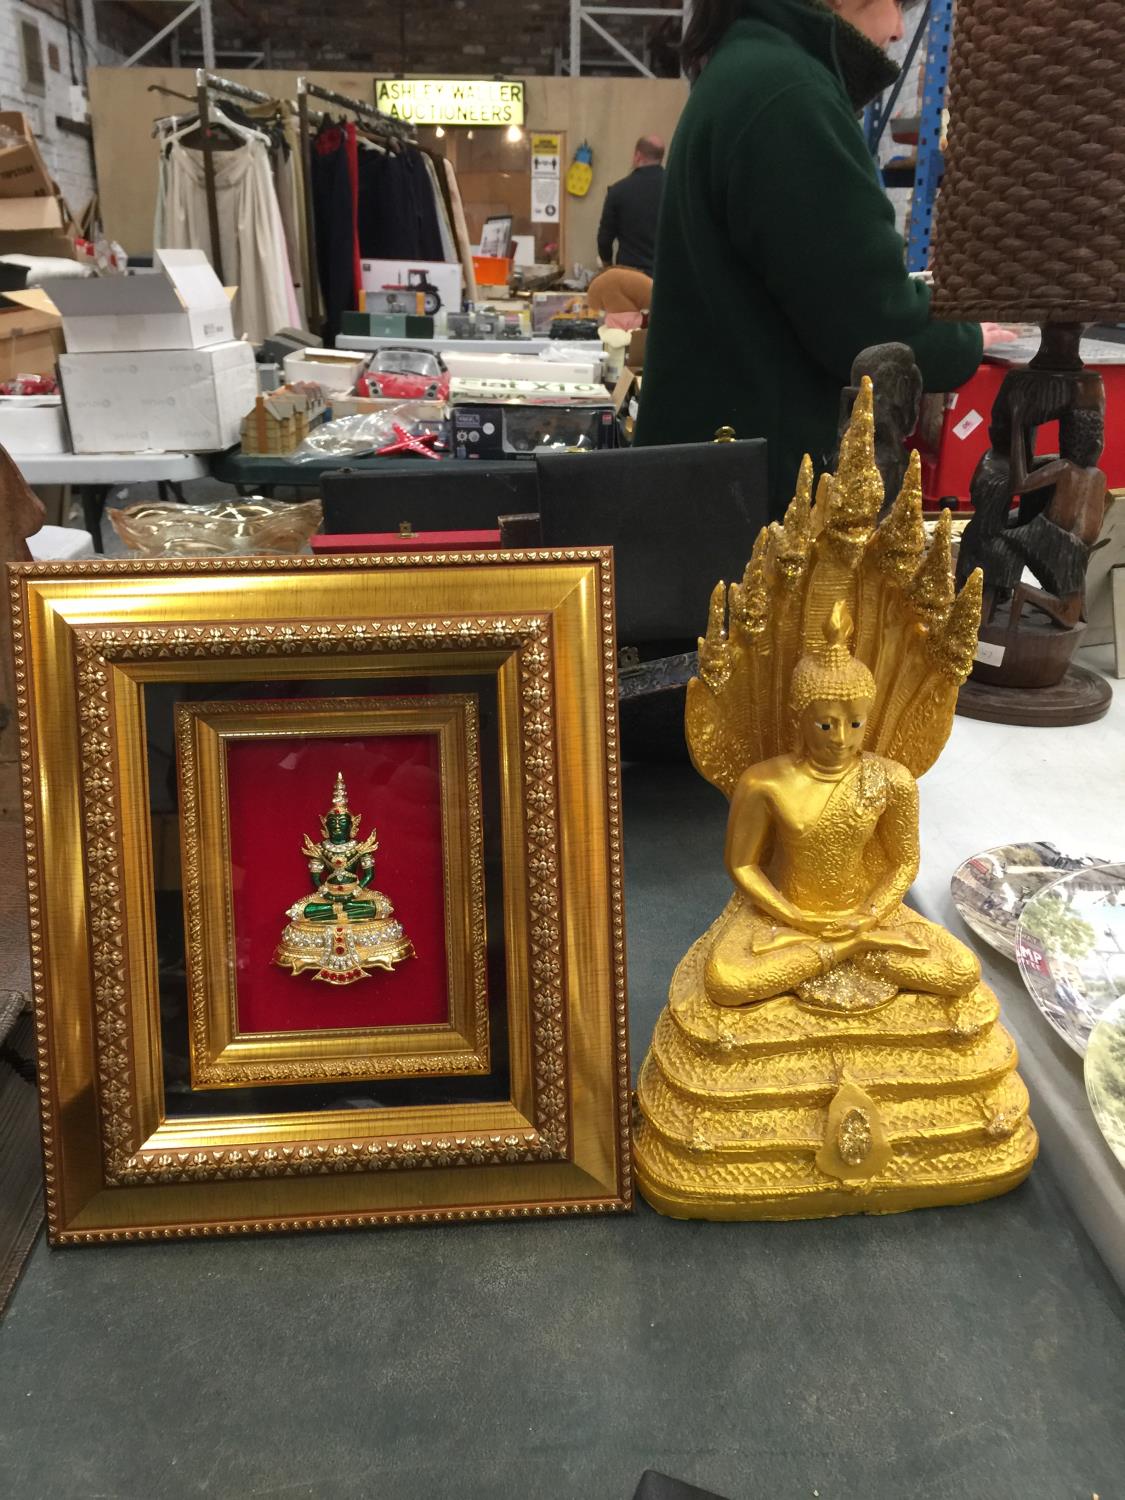 A GOLD COLOURED FIGURE OF A DEITY AND A FRAMED 3D DEITY - Image 3 of 3